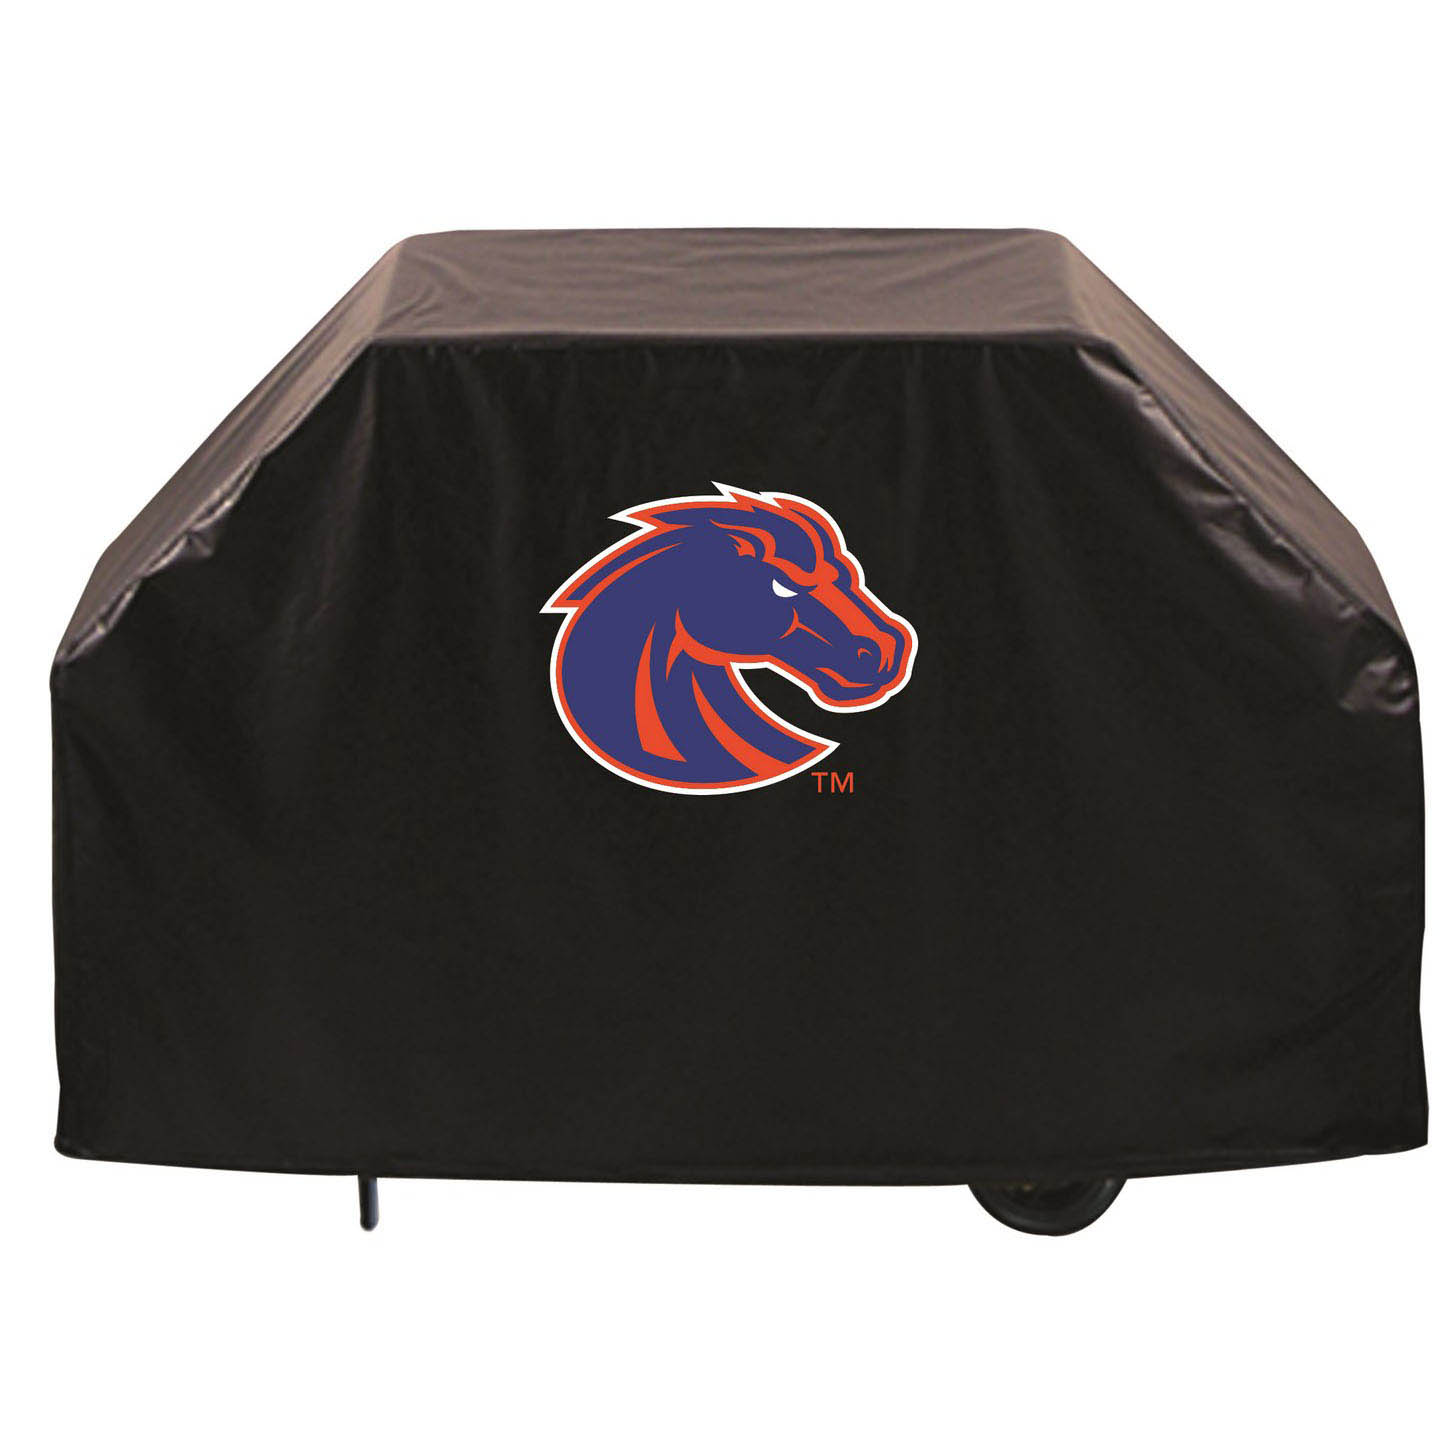 Boise State Grill Cover